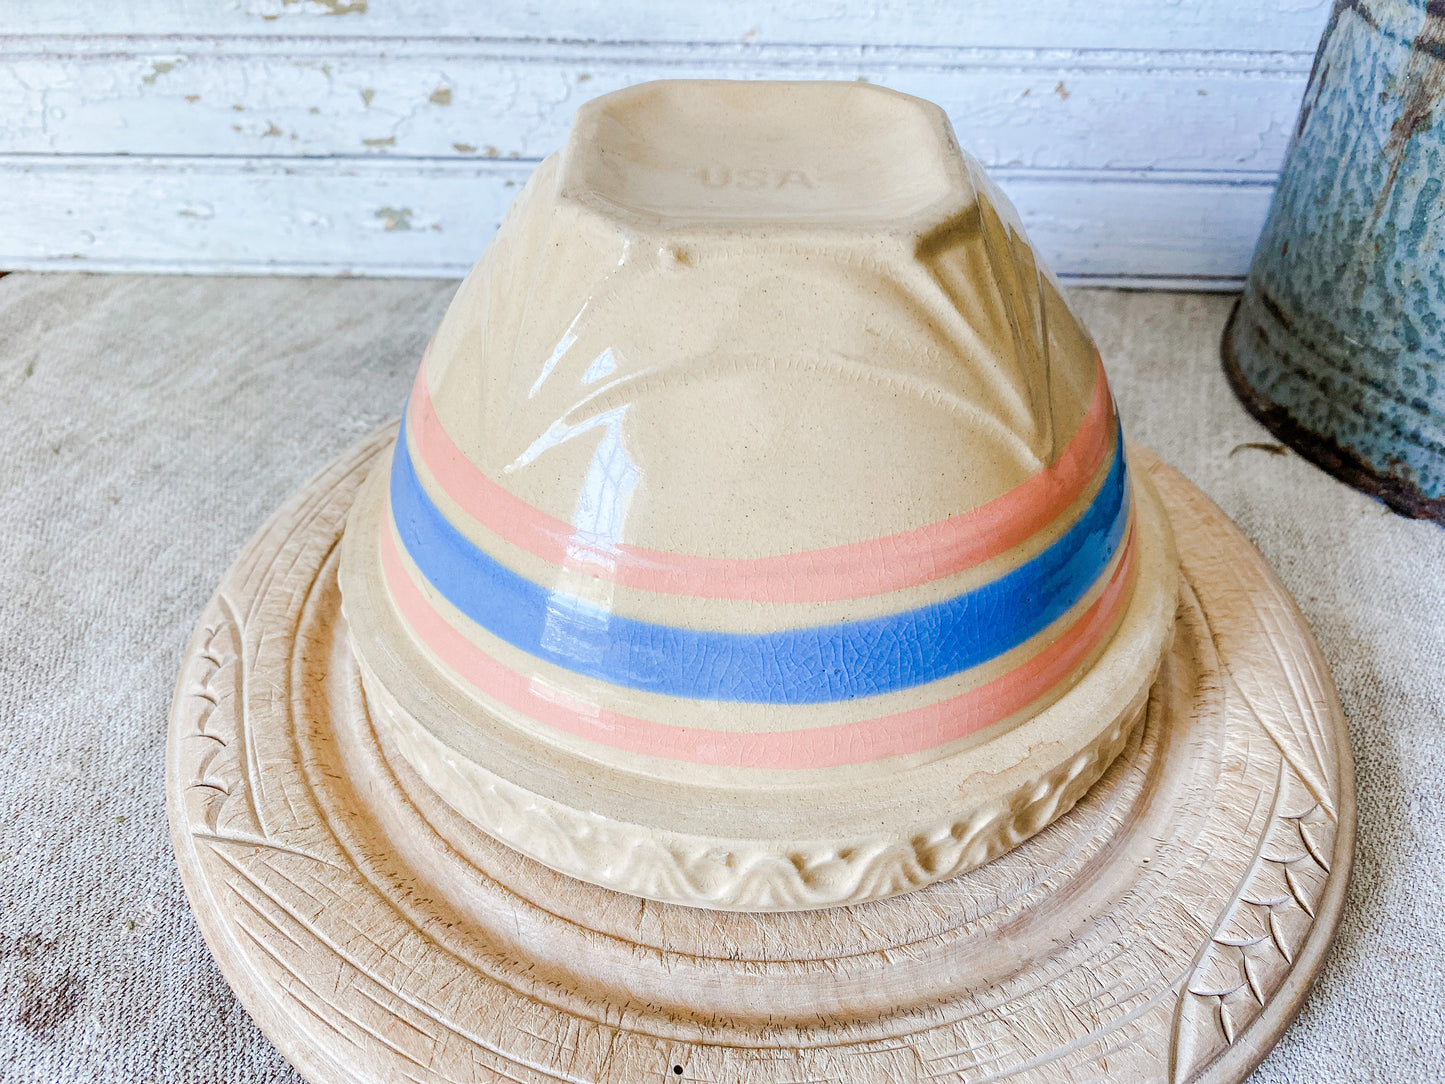 Antique Yellow Ware 7" Mixing Bowl | Pie Crust Trim with Blue and Pink Stripes